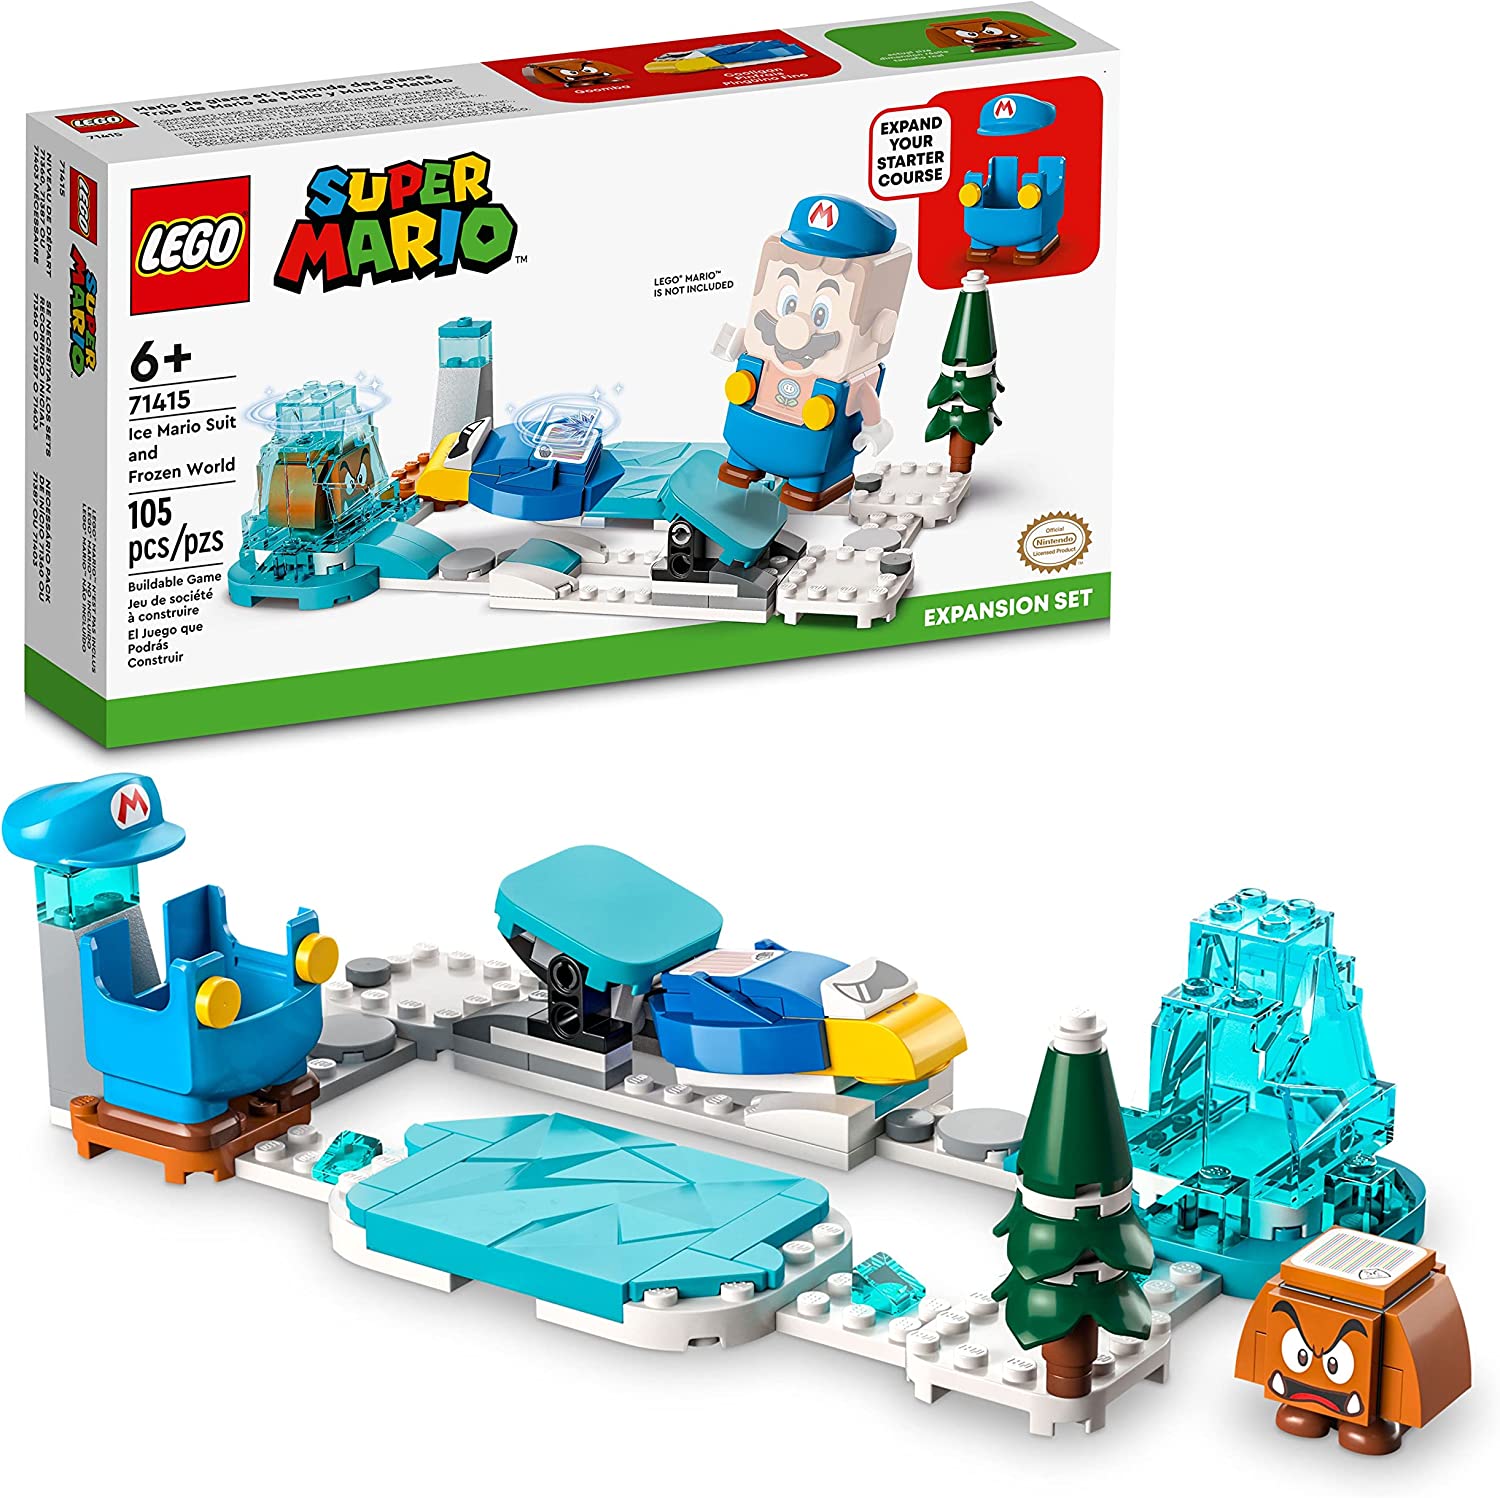 LEGO Super Mario Ice Mario Suit and Frozen World Expansion Pack #71415